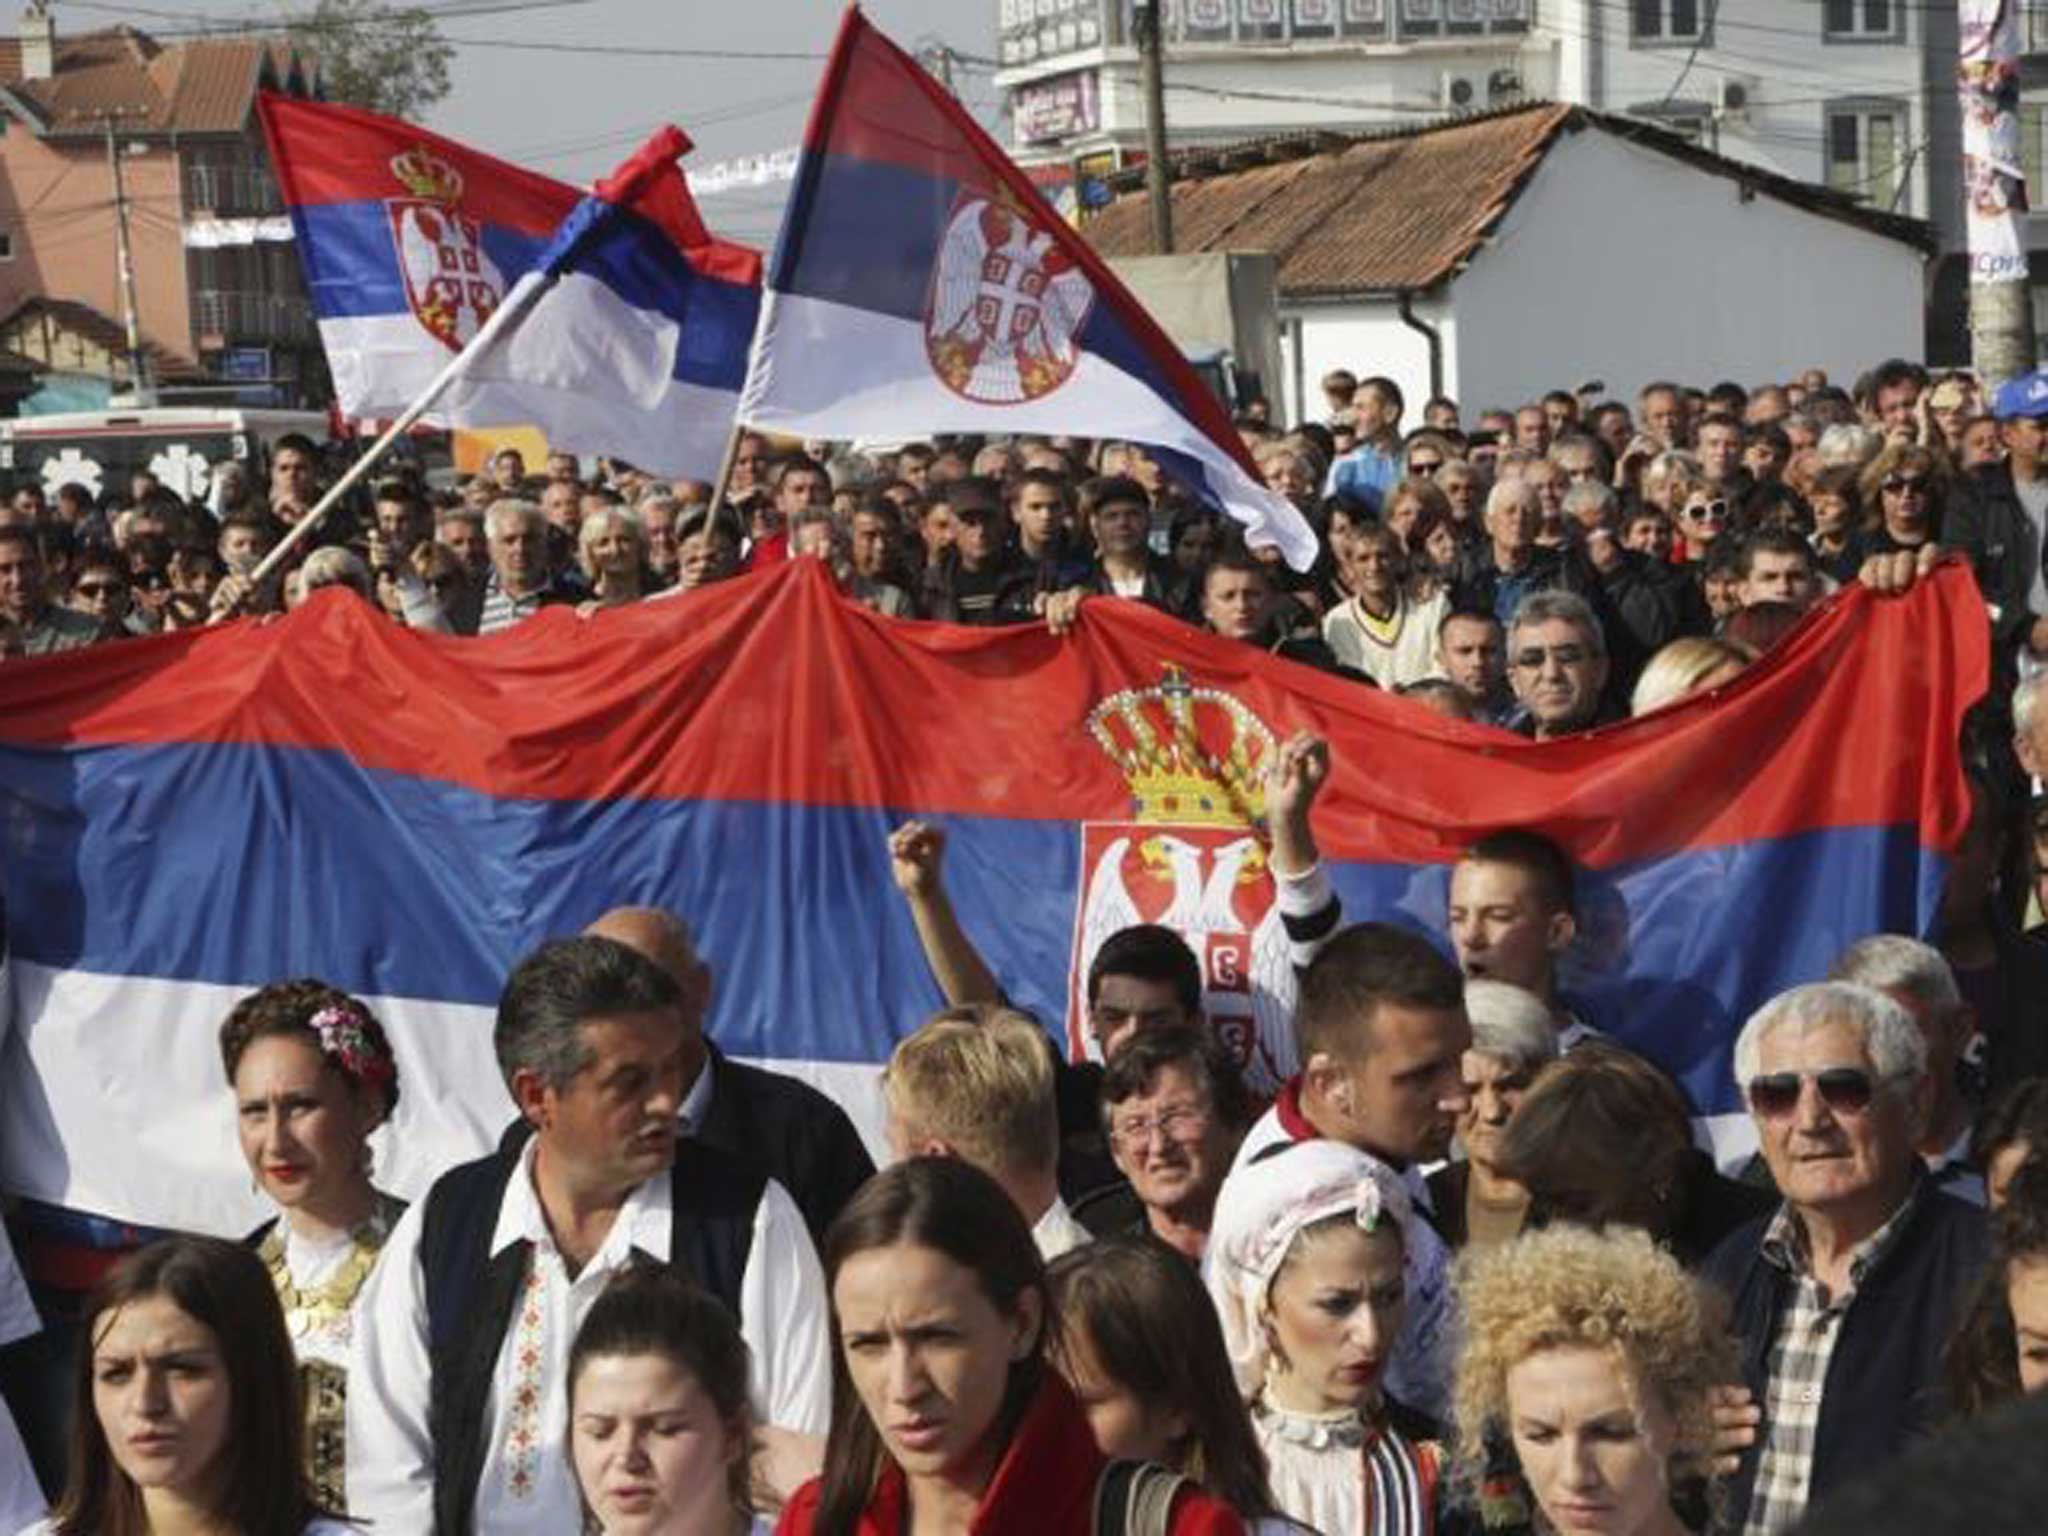 Taking sides: a rally by Kosovo Serbs